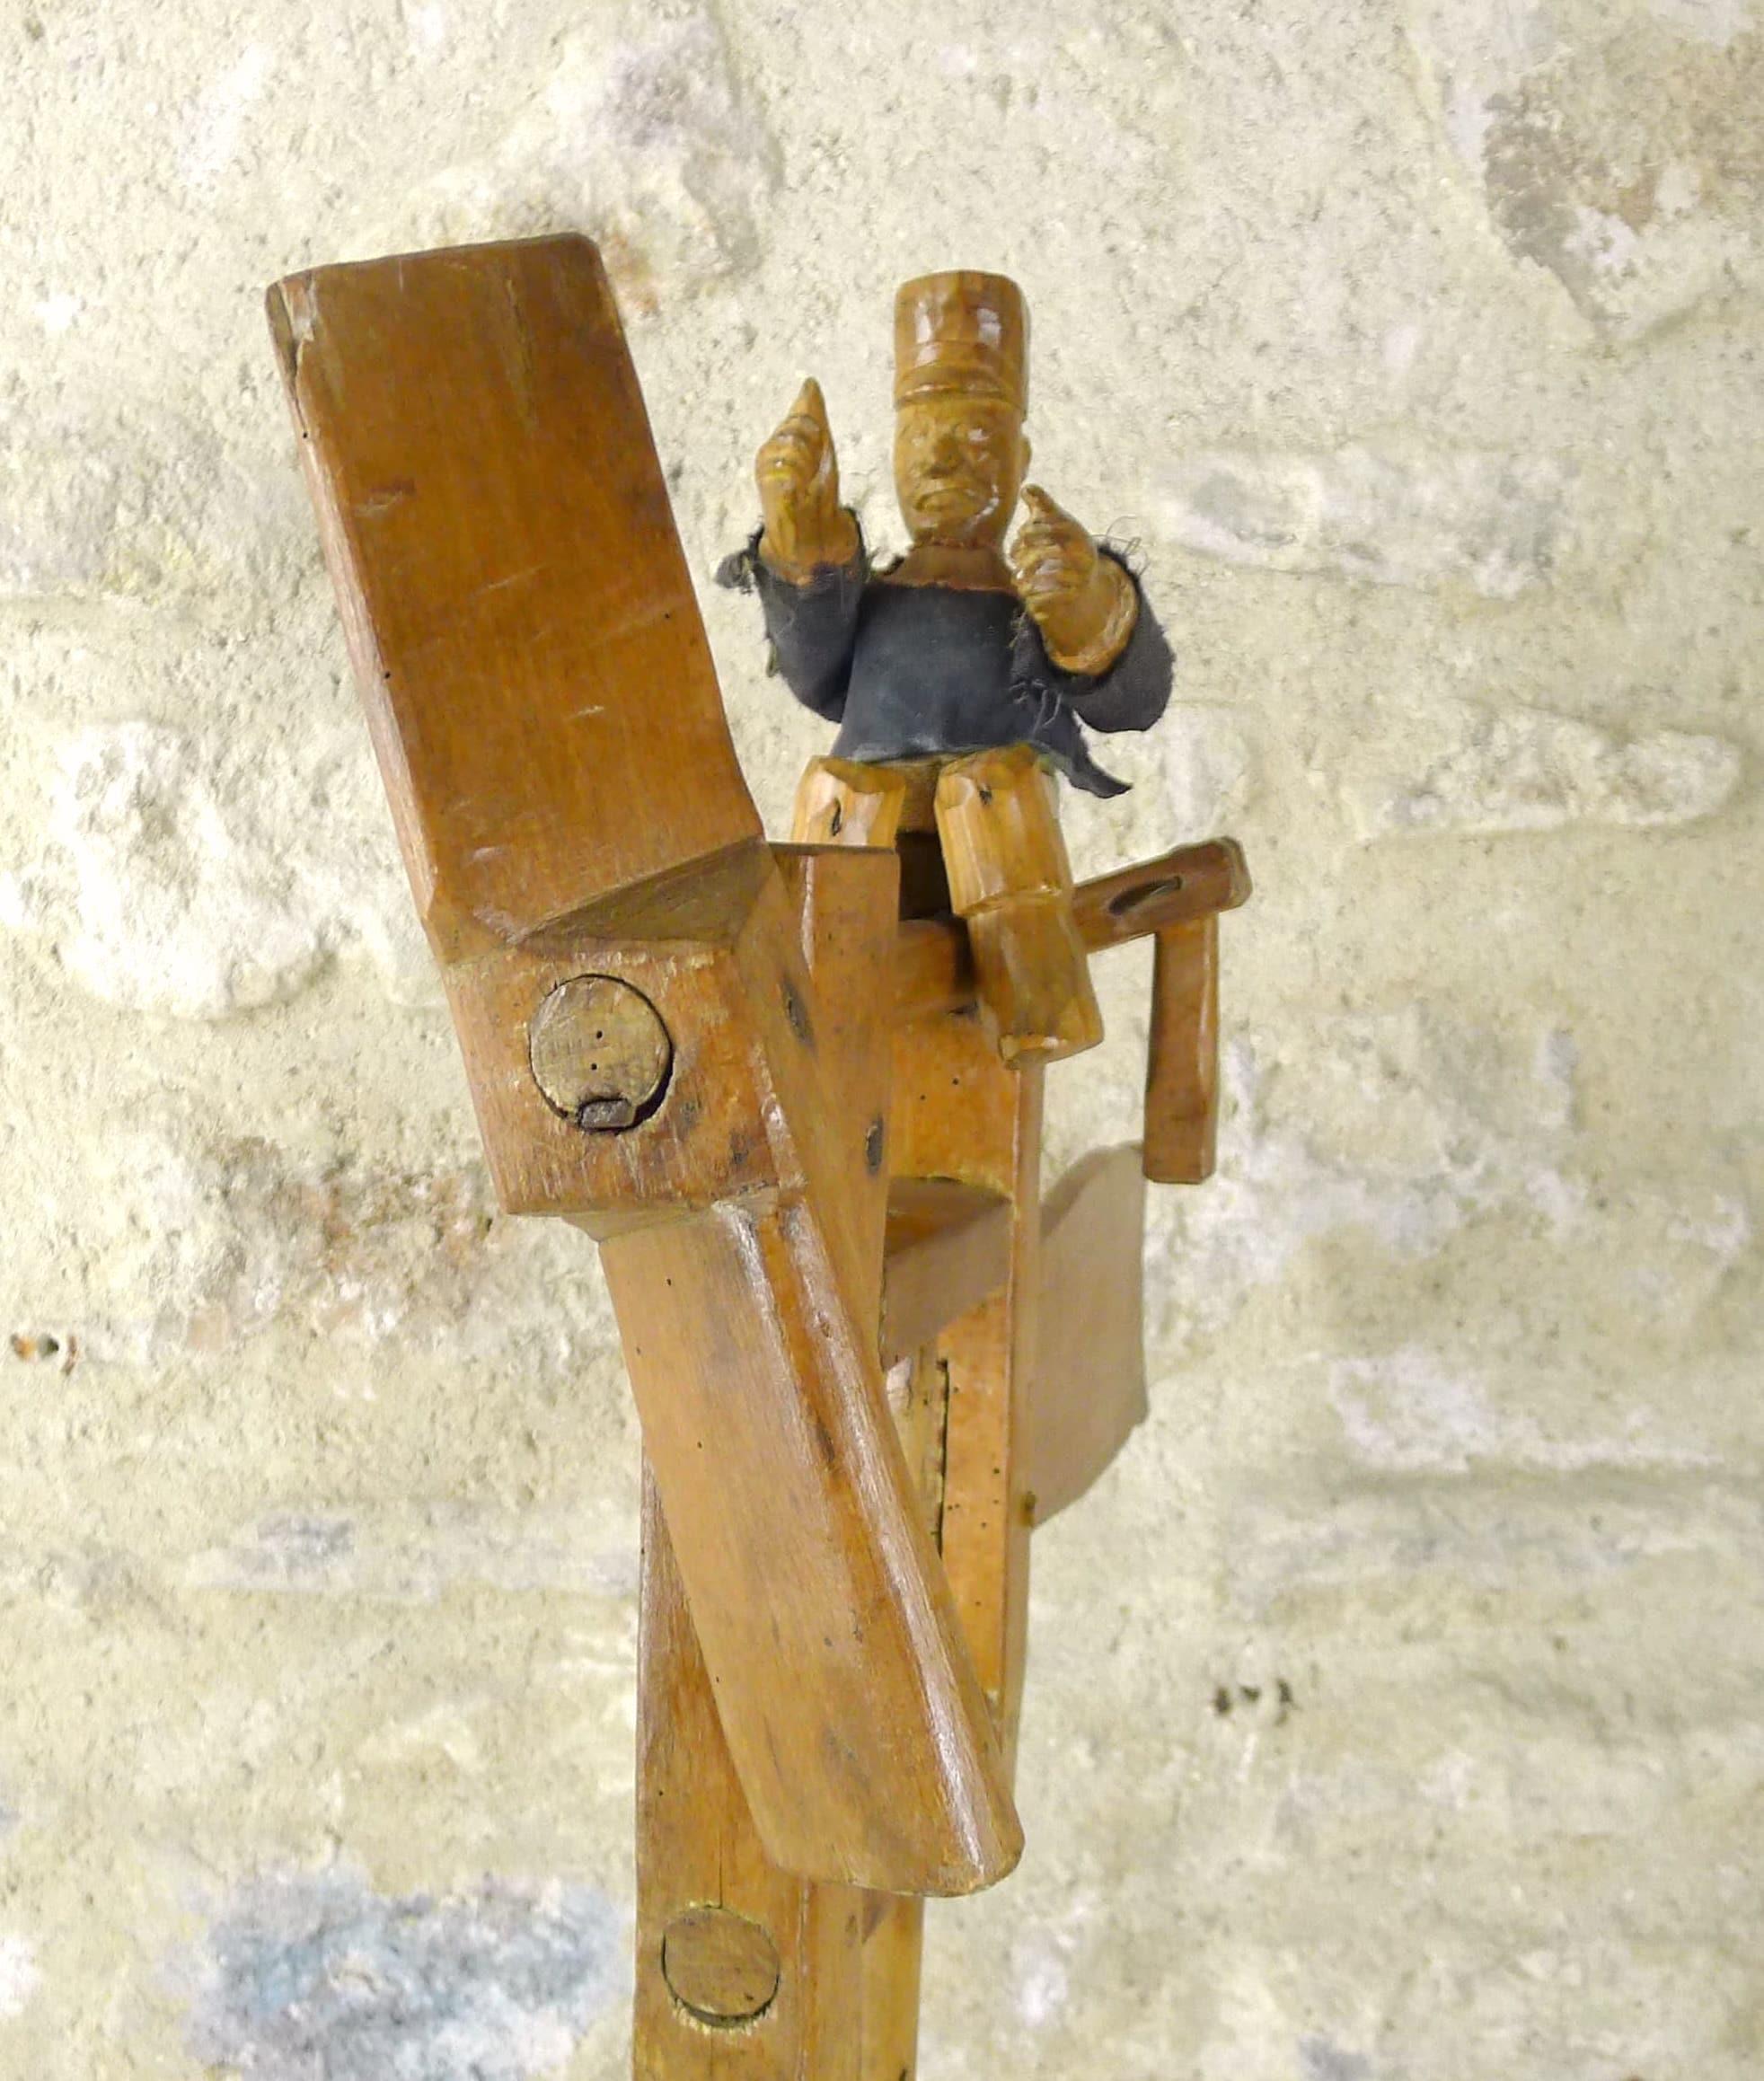 In shape of French policeman
Screw is spinning because of the wind and make a wooden noise.
Used to scare animals.

Rare, from France.